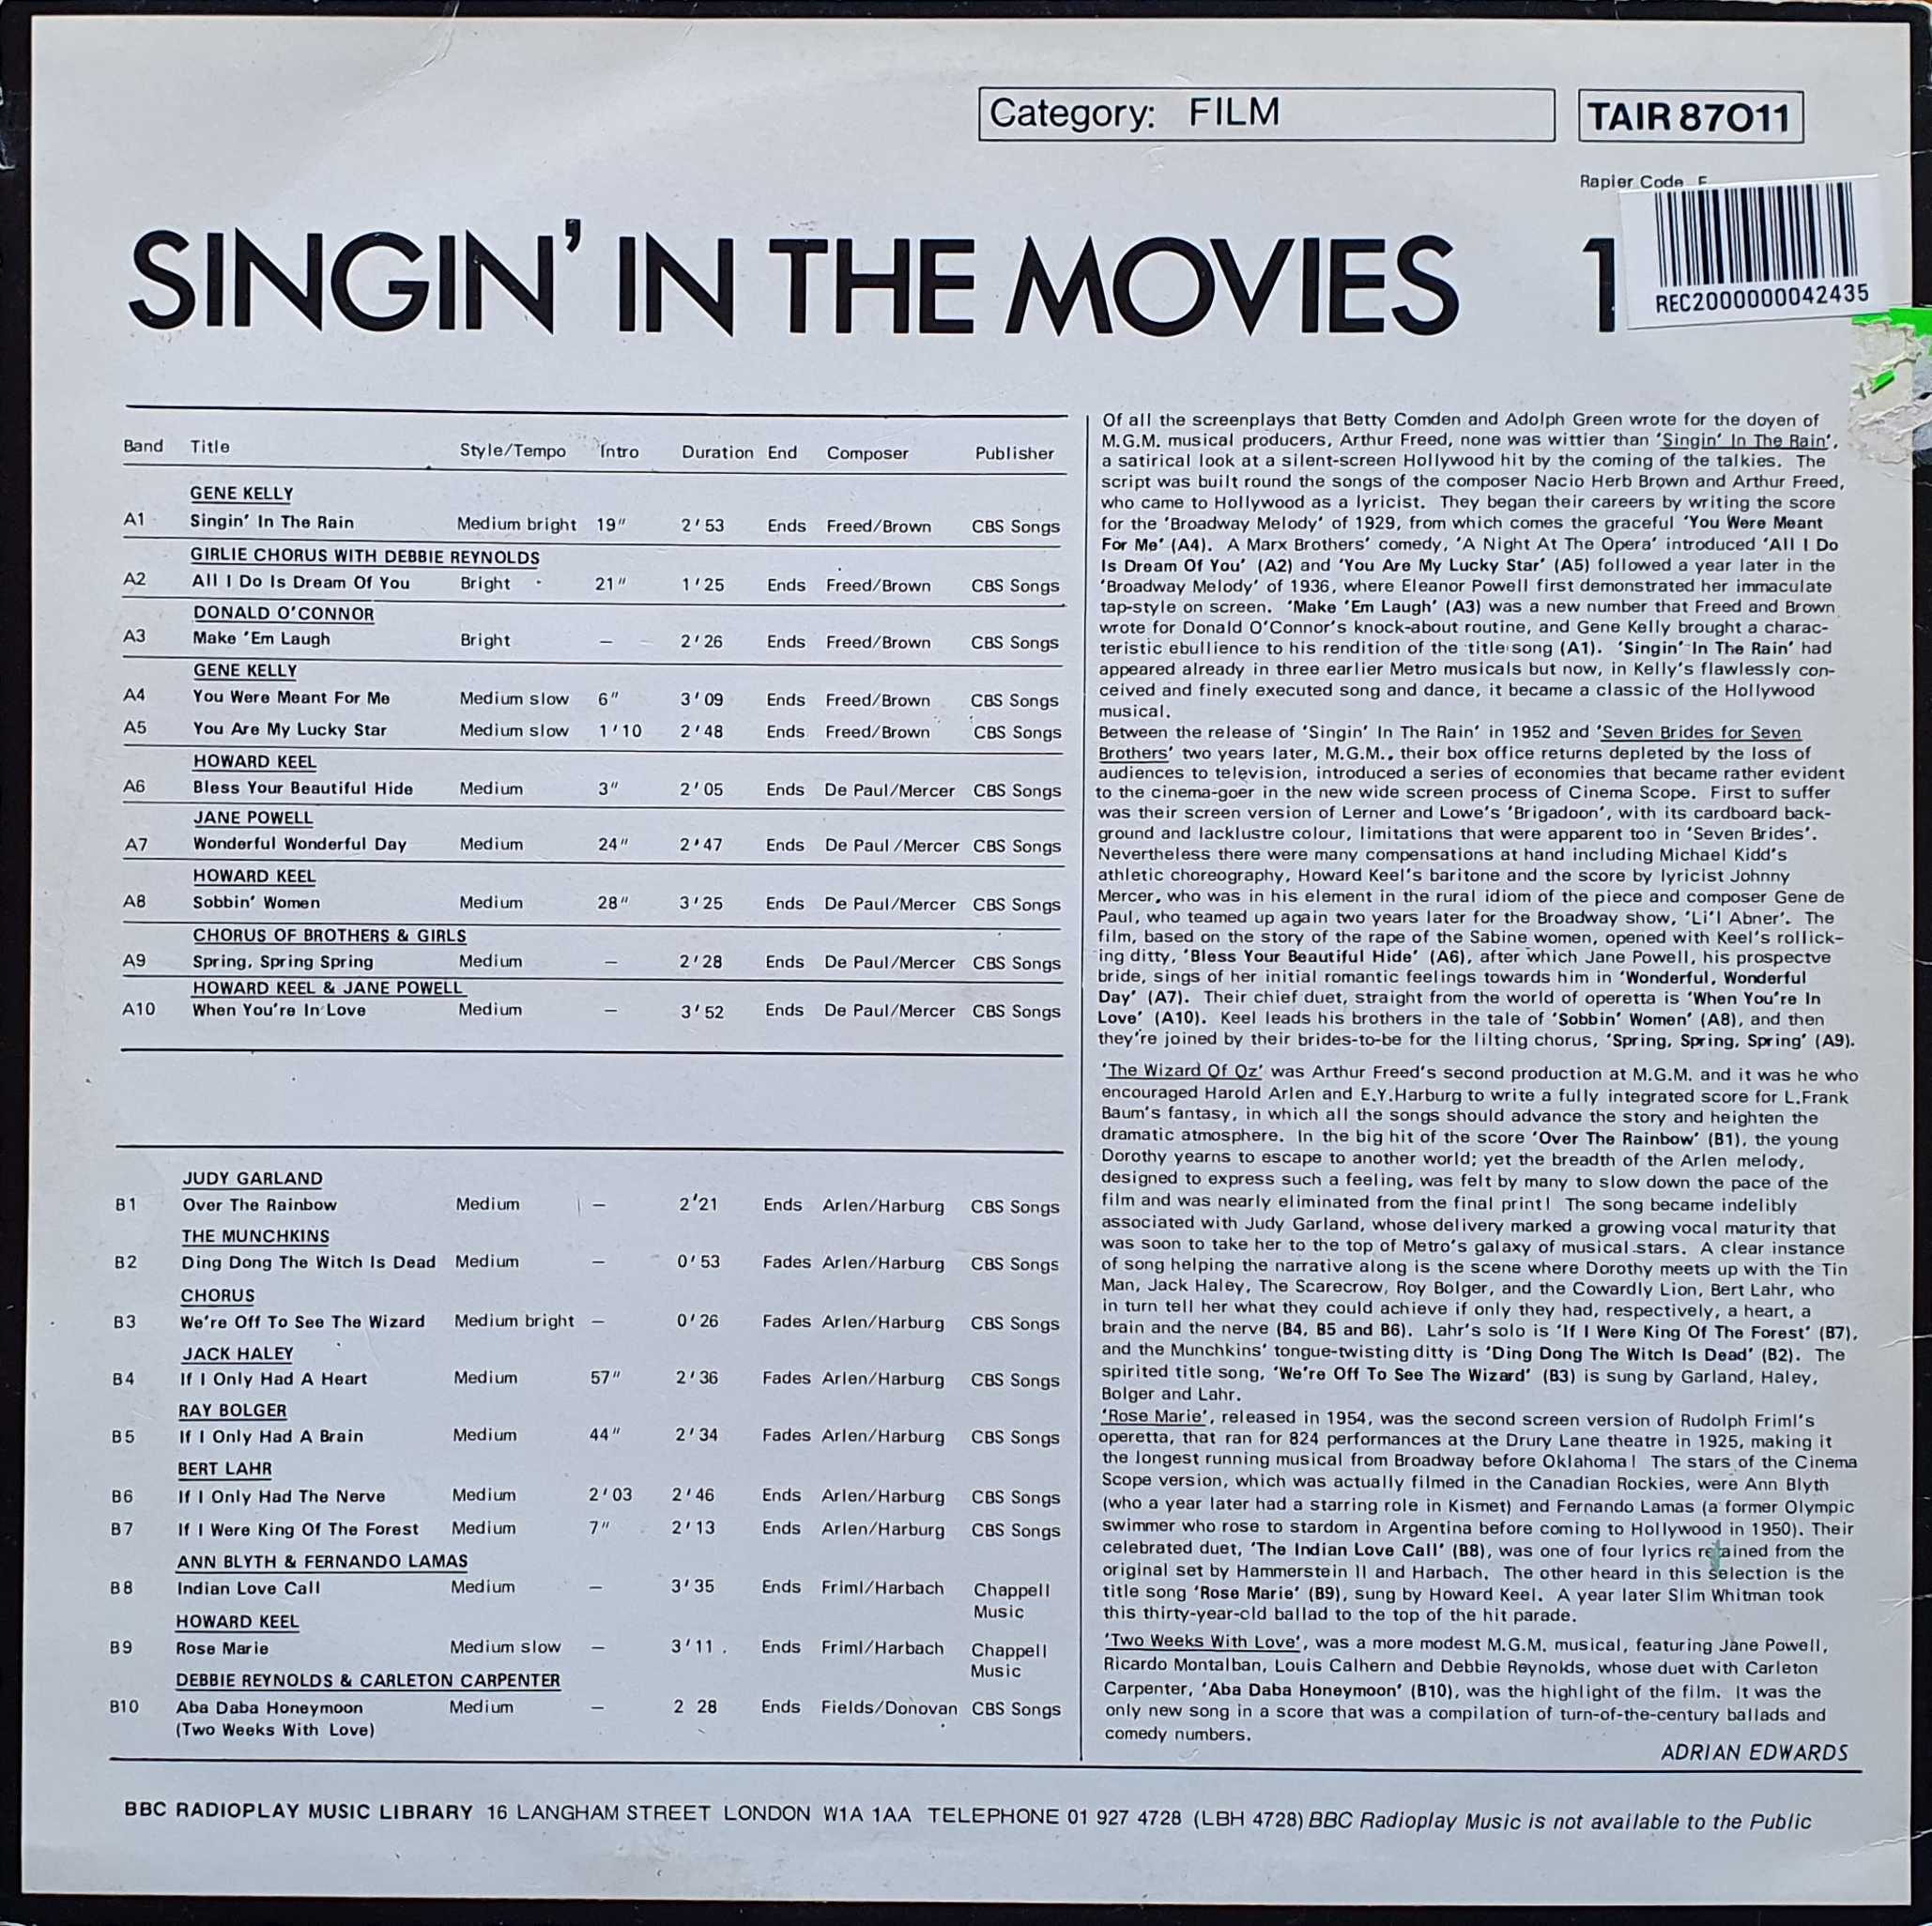 Picture of TAIR 87011 Singin' in the Movies 1 by artist Various from the BBC records and Tapes library